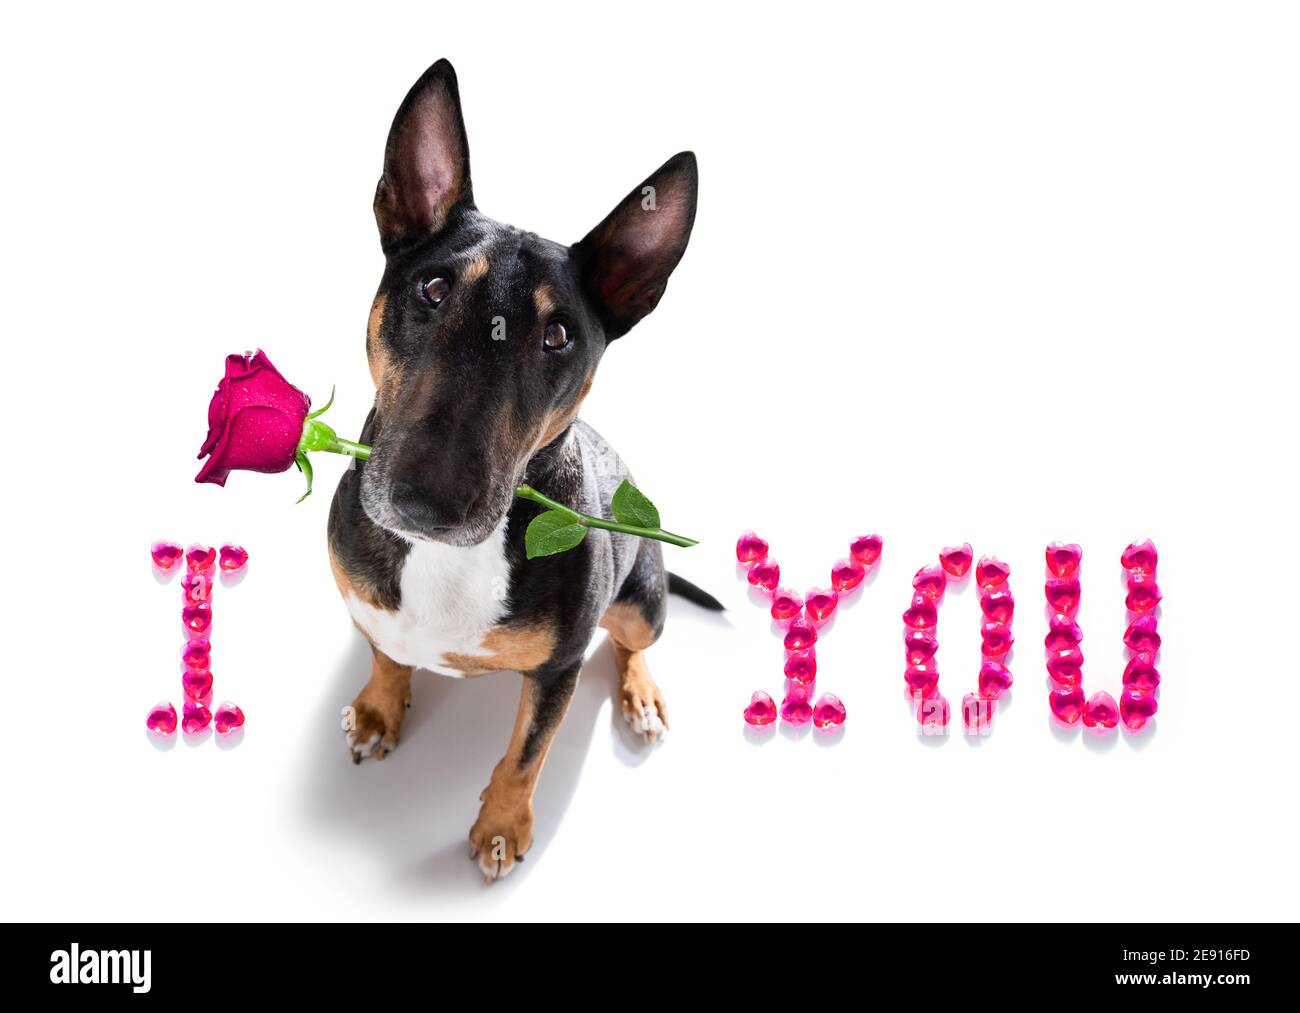 Miniature Bull Terrier dog on valentines love heart shape with I love you sign as background isolated on white Stock Photo